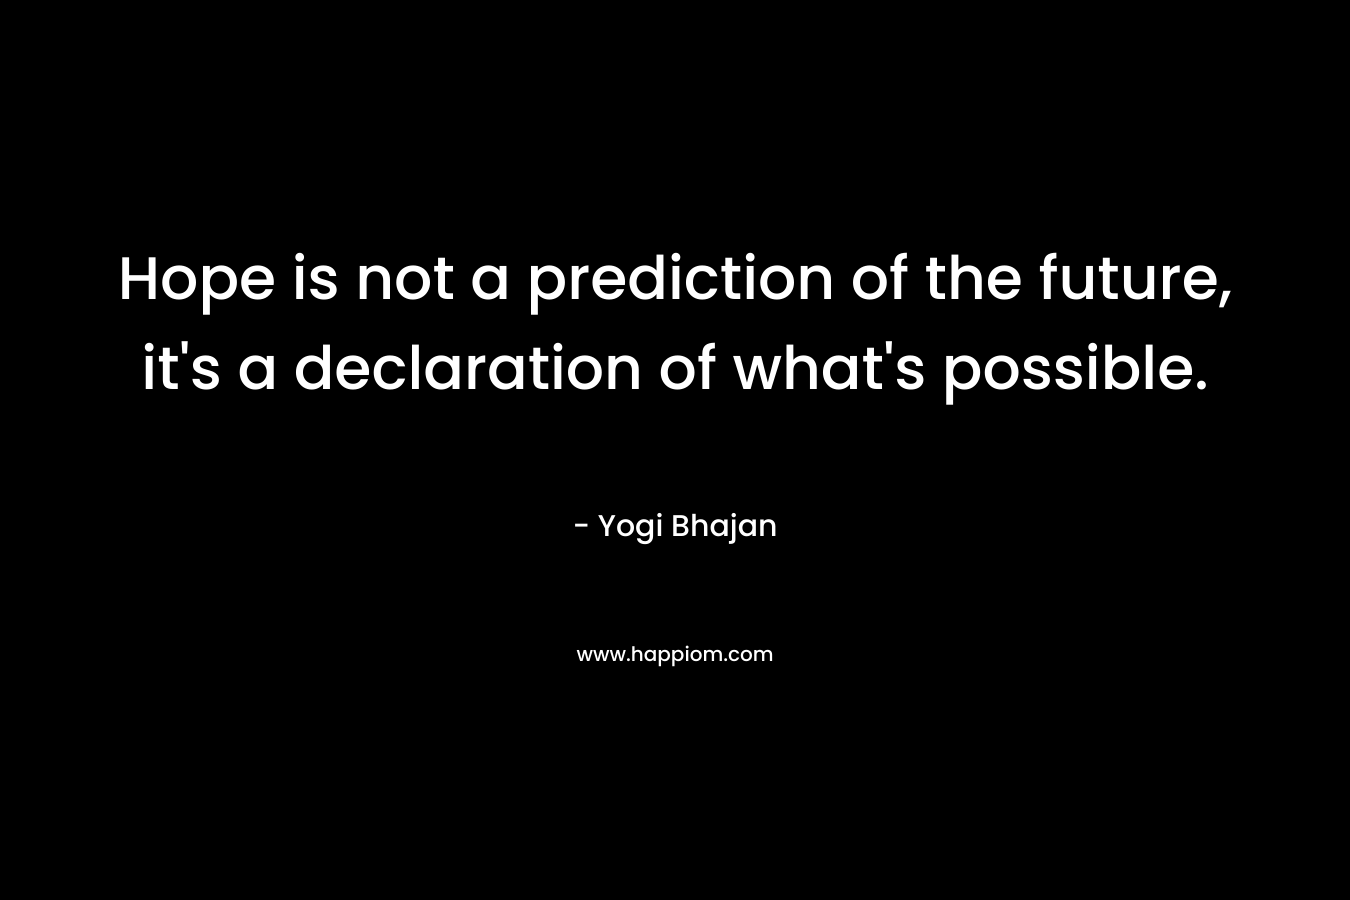 Hope is not a prediction of the future, it’s a declaration of what’s possible. – Yogi Bhajan